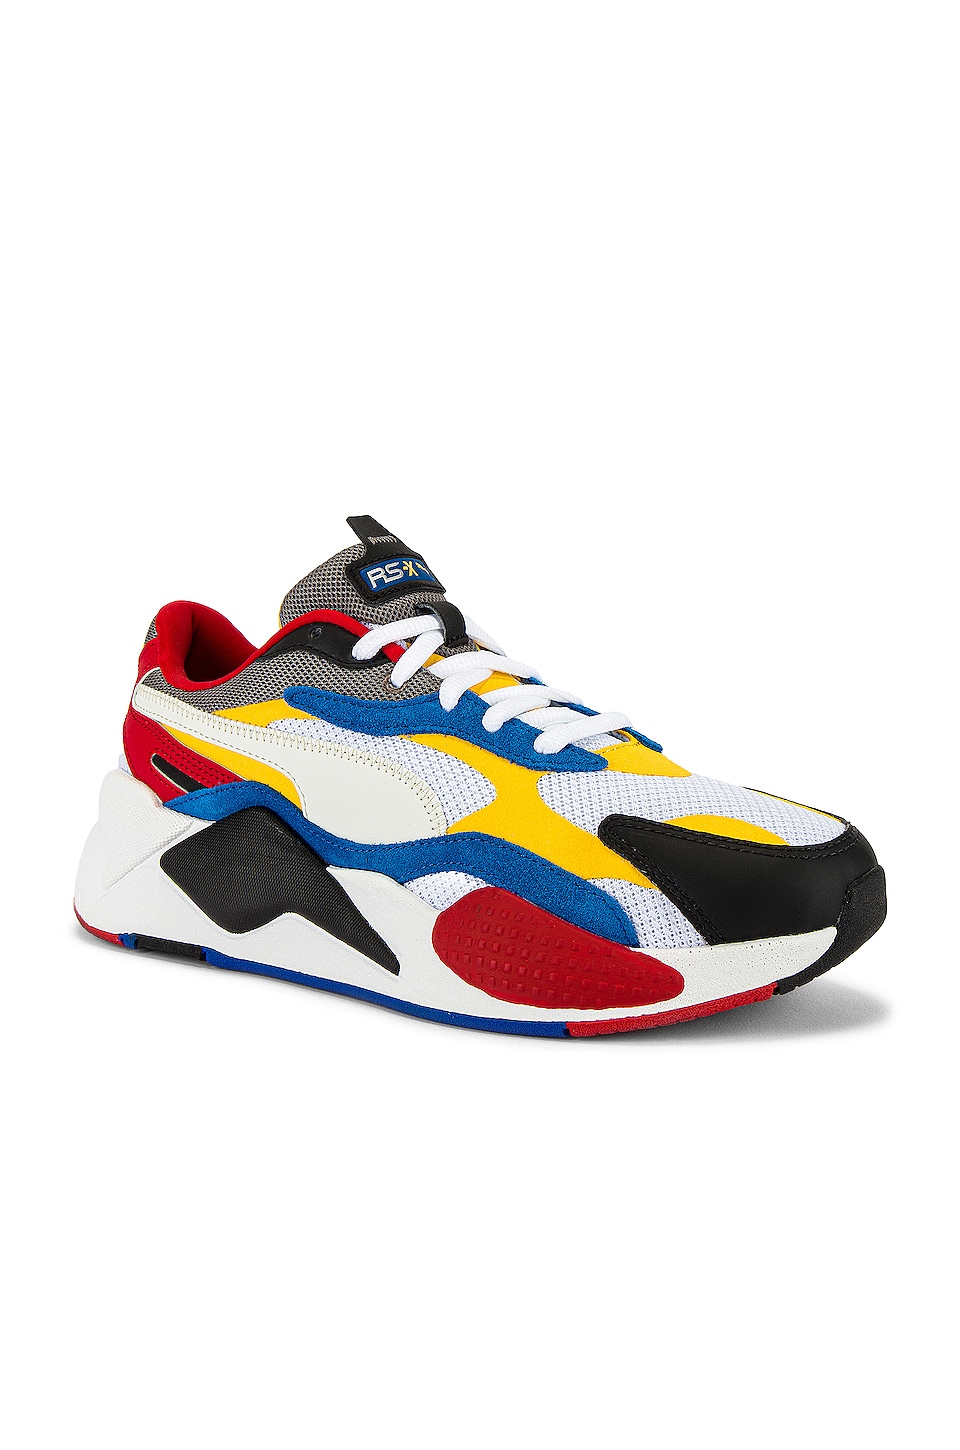 Puma Select RSX Cube RS-X3 Puzzle in 